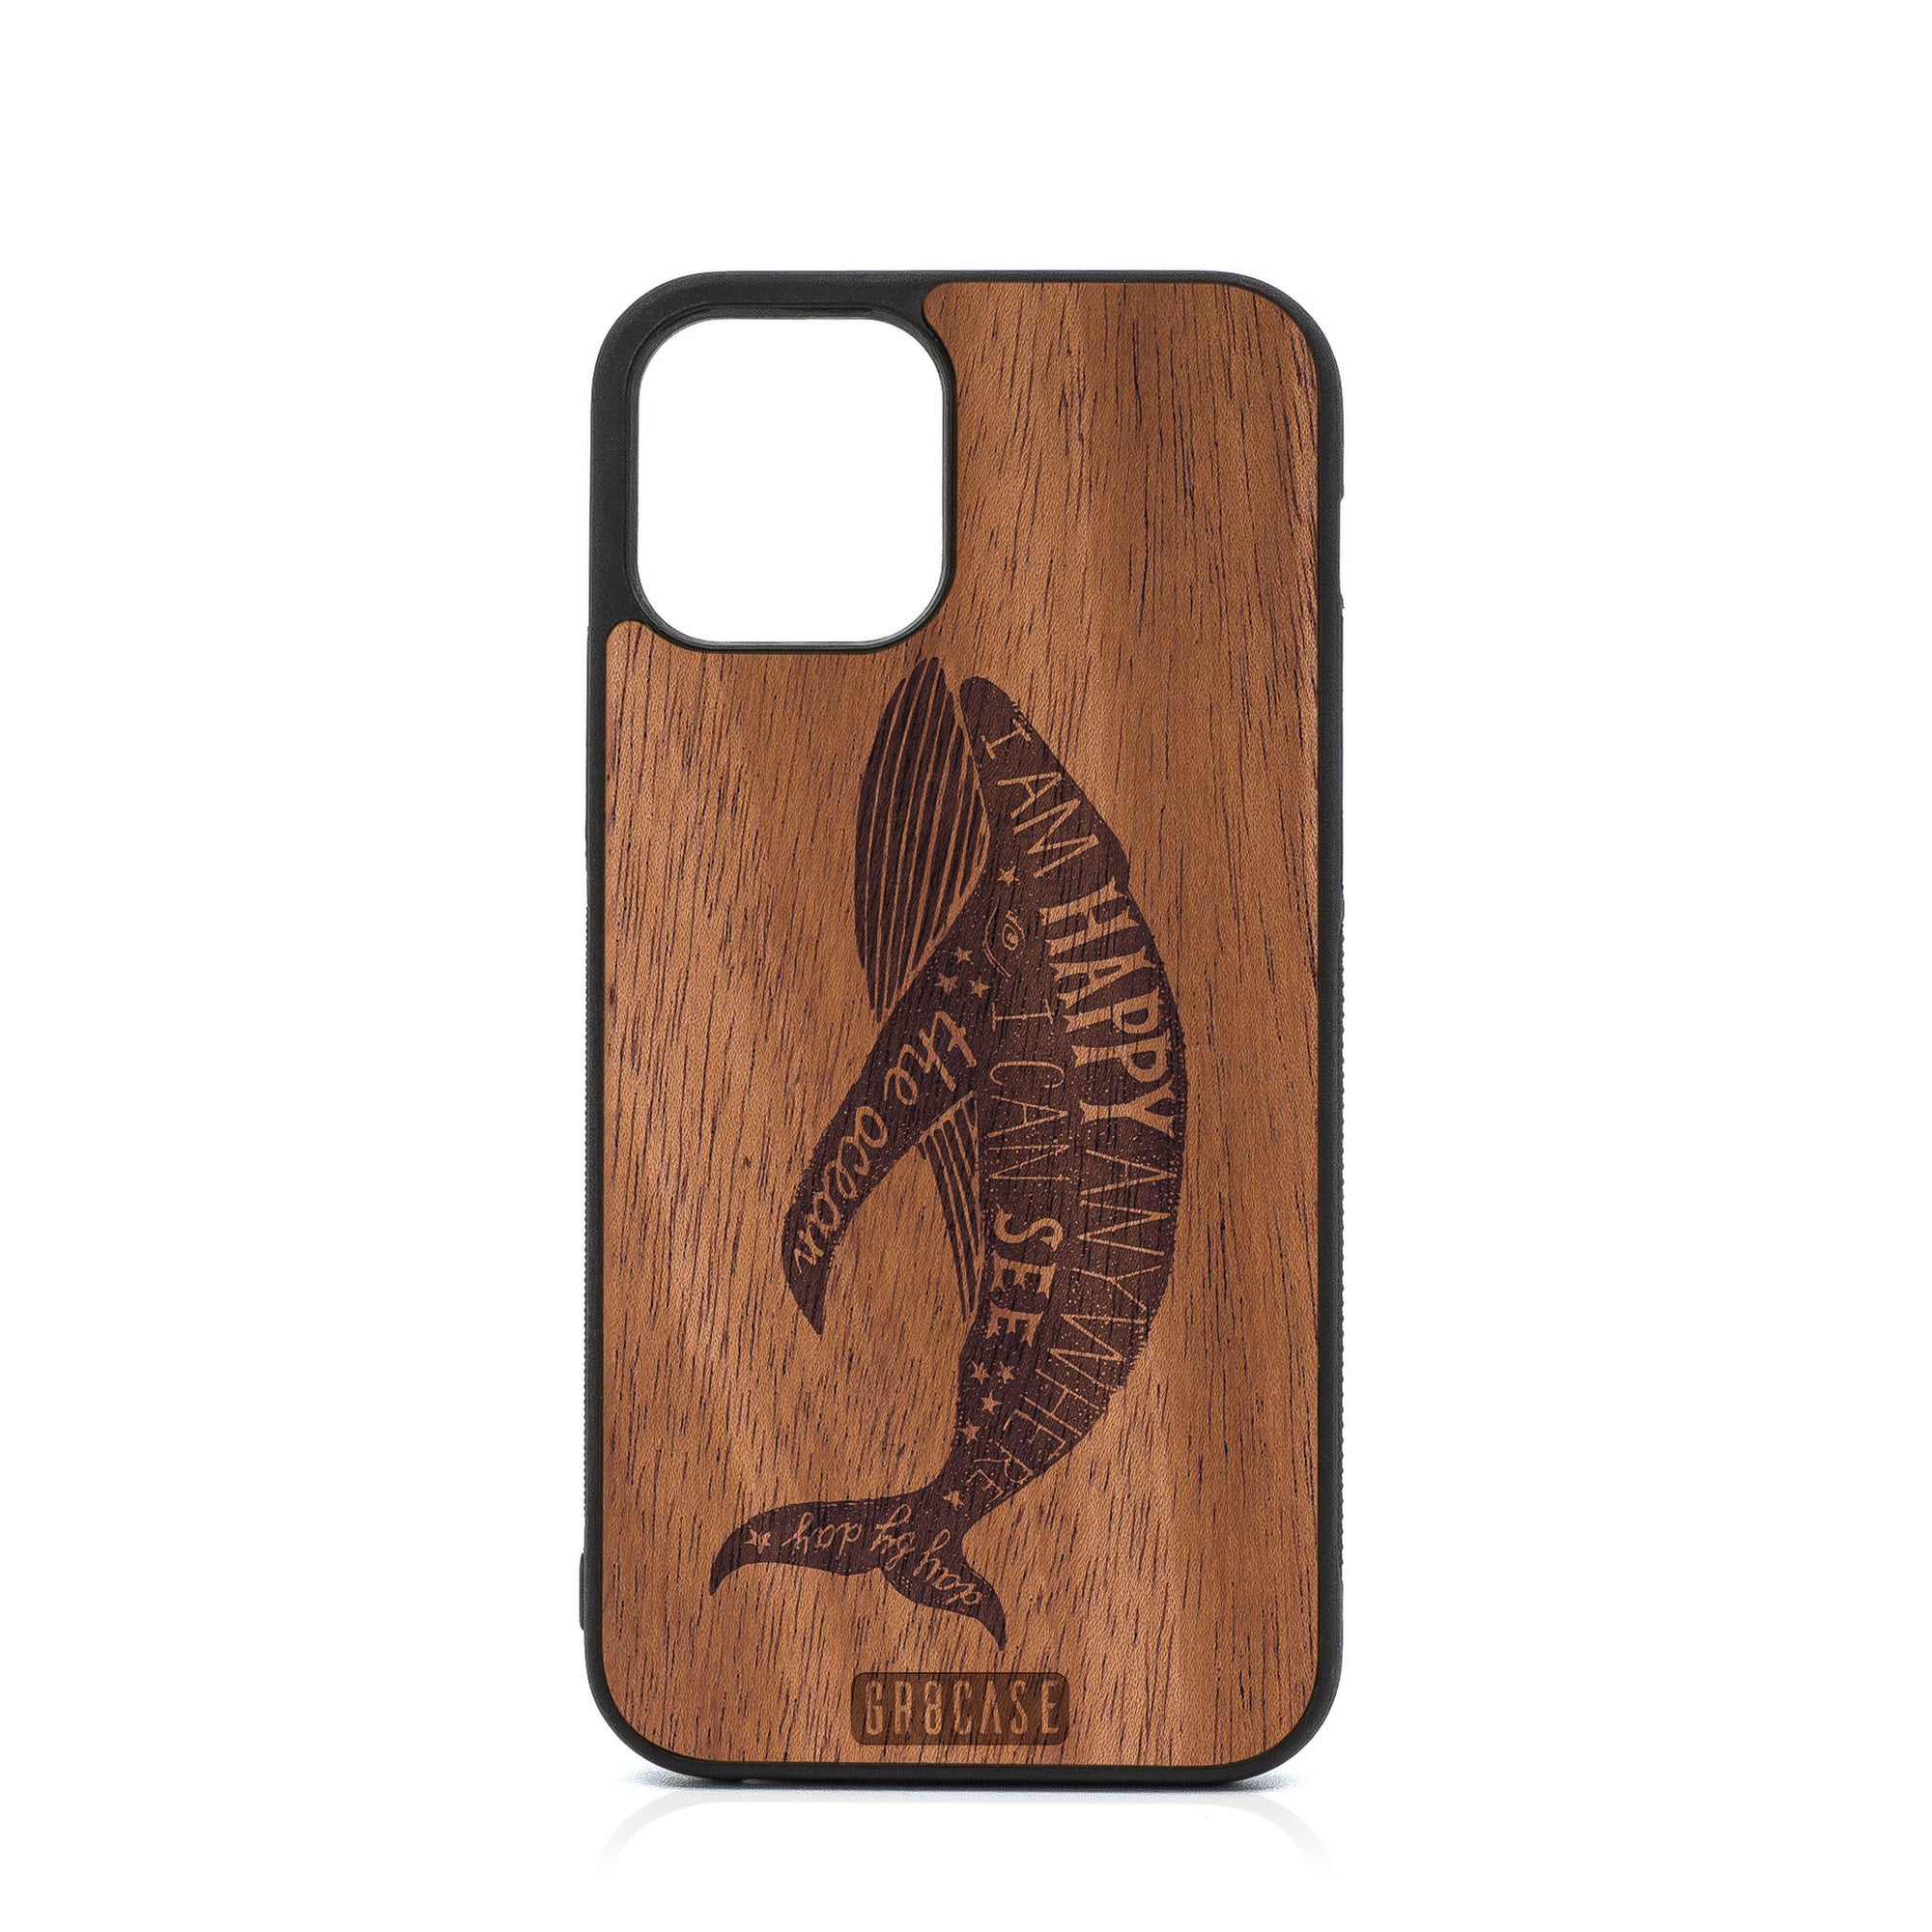 I'm Happy Anywhere I Can See The Ocean (Whale) Design Wood Case For iPhone 12